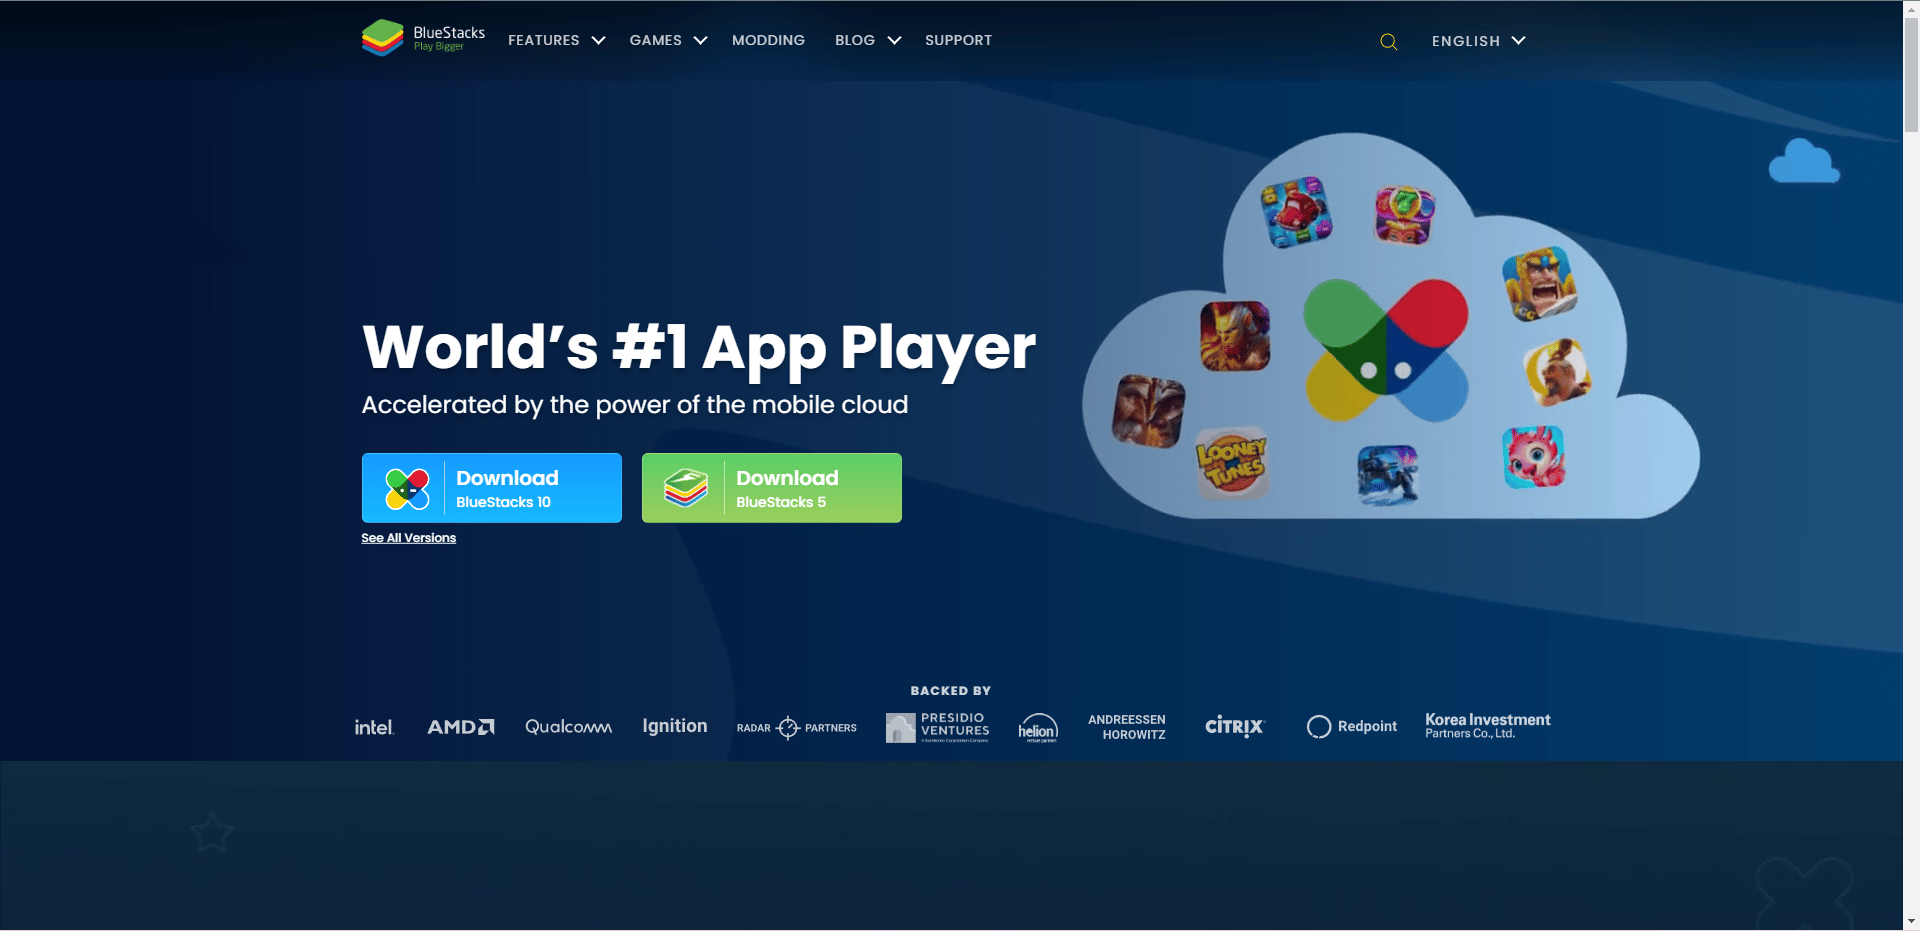 Bluestacks official website. Best Android OS for PC